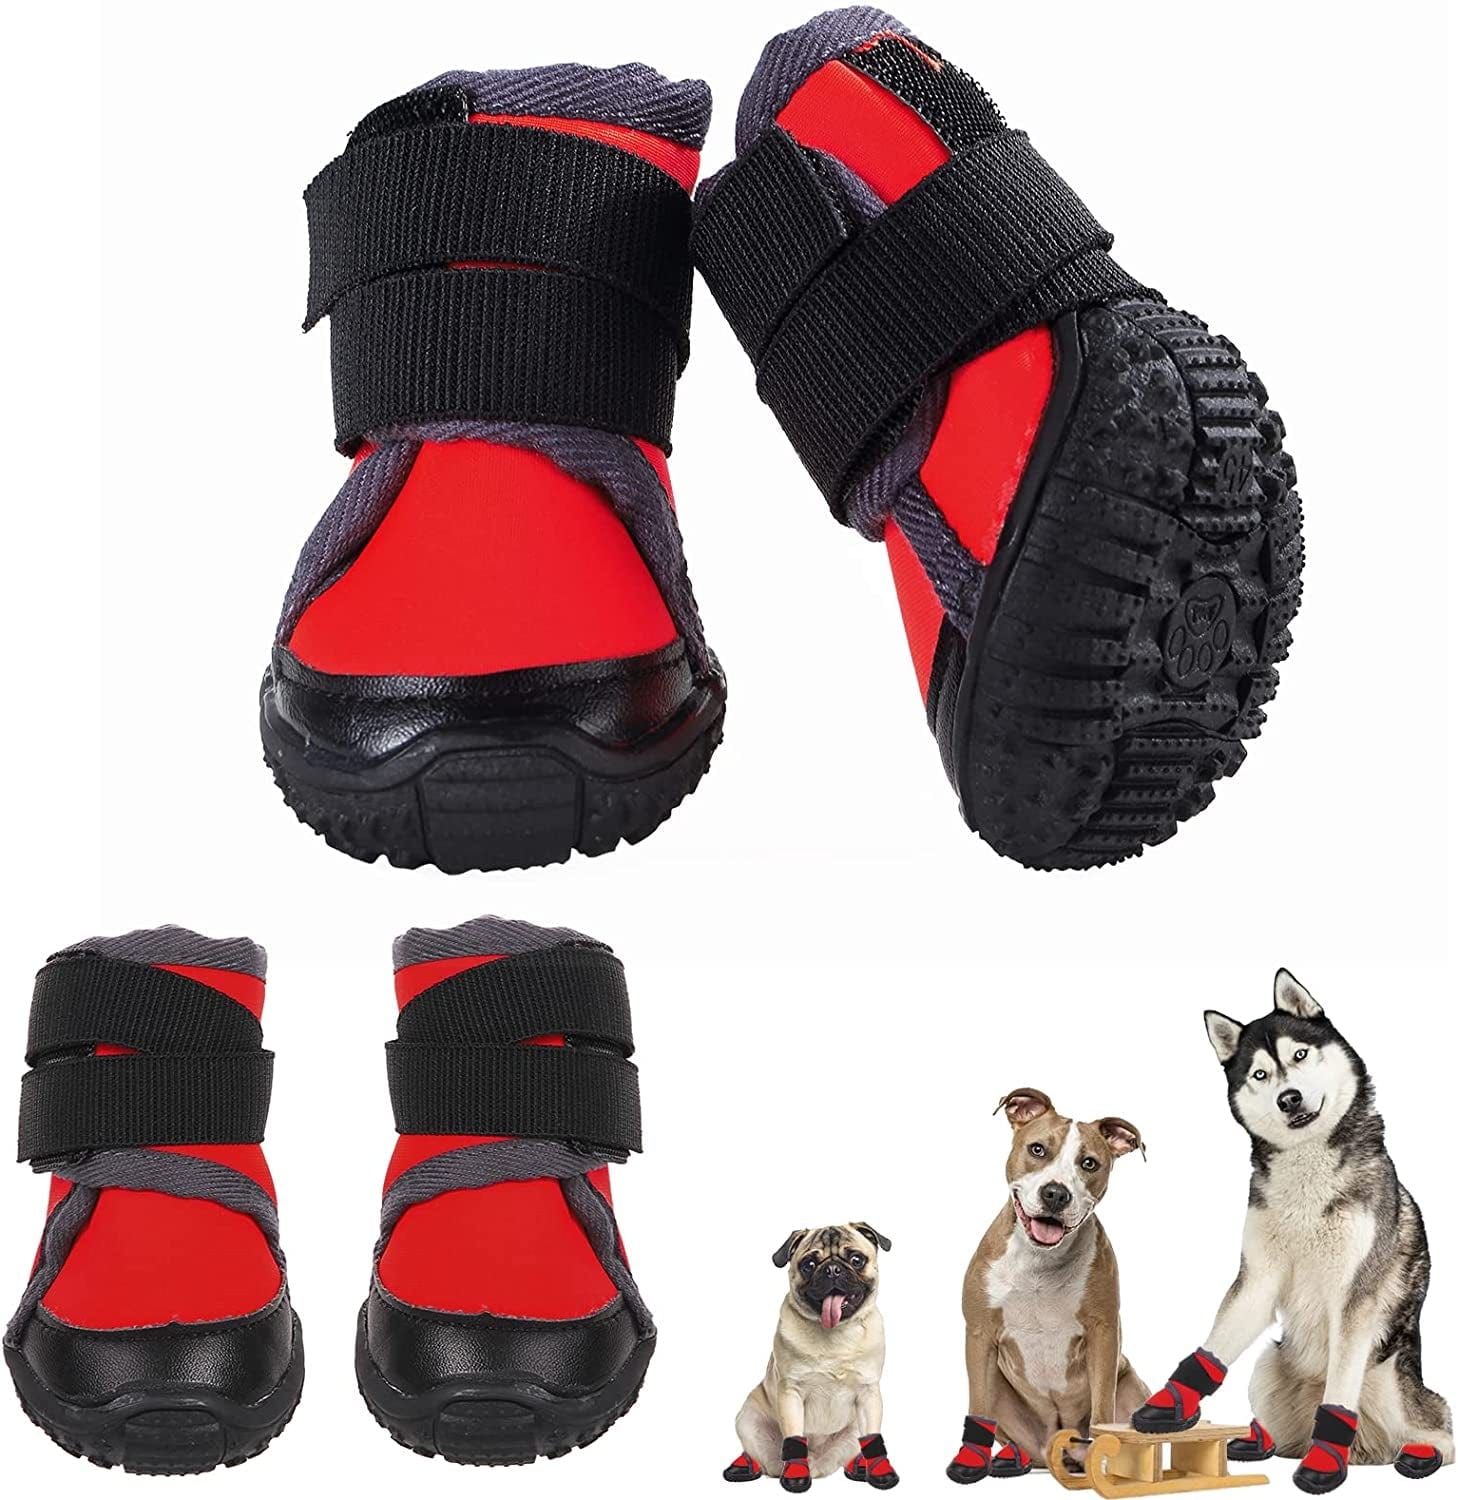 Non Slip Waterproof Sport Dog Toddler Shoes For Large Dogs Ideal For  Outdoor Activities And Running Pet Accessories Included Style #236335  LJ2012778 From Pamela56, $22.84 | DHgate.Com